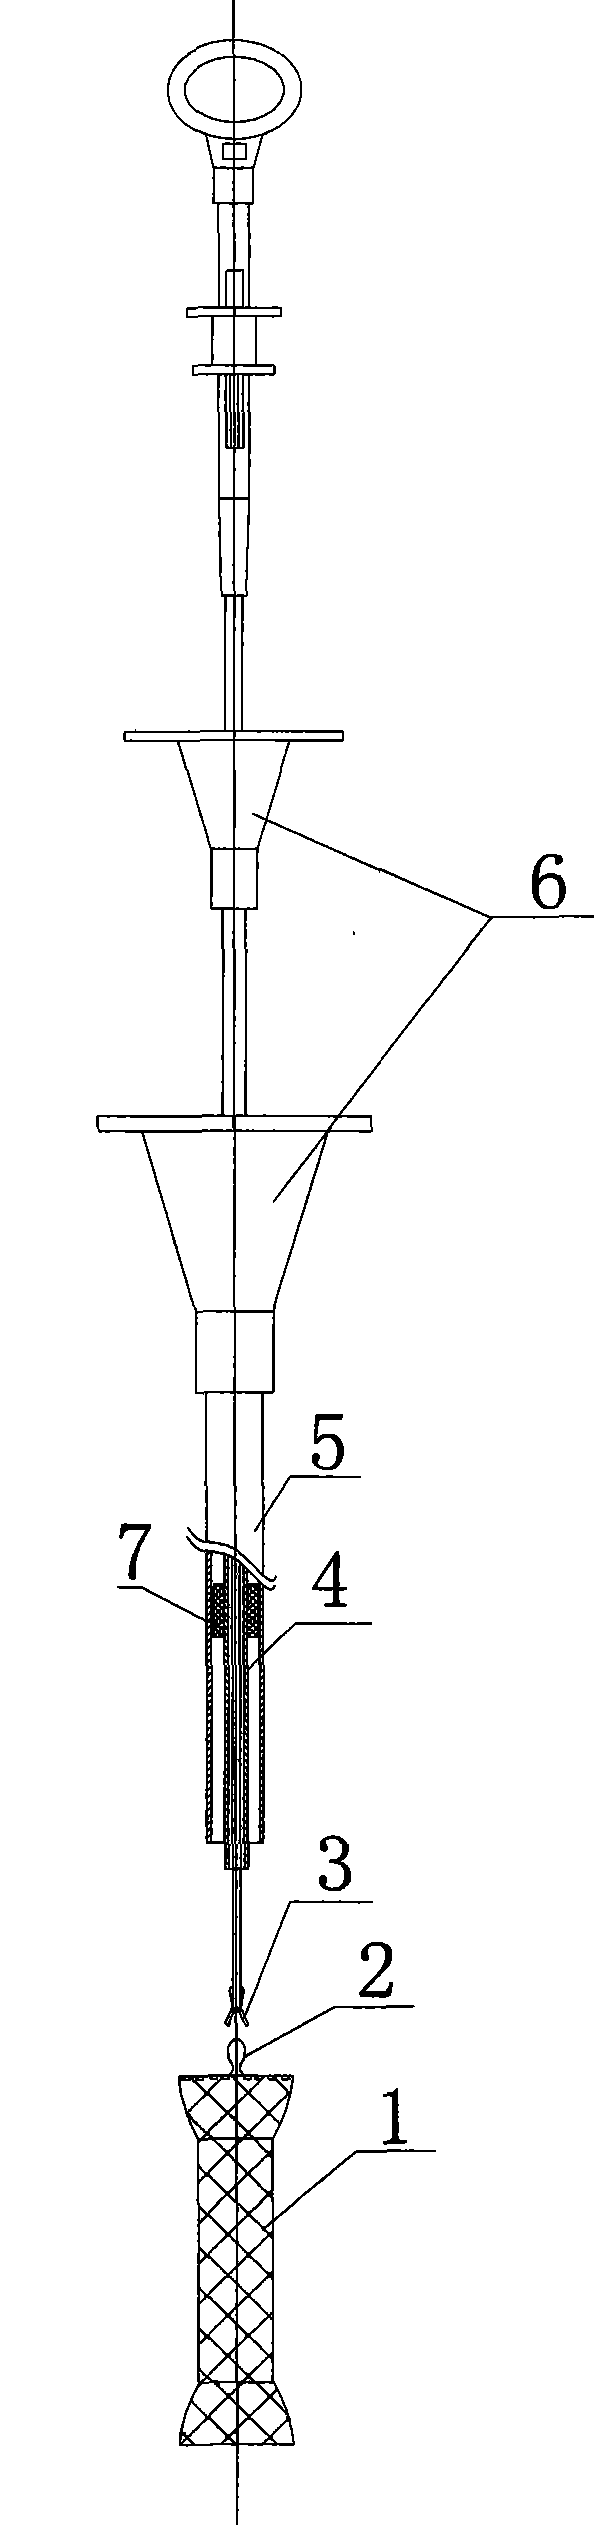 Nickel-titanium memory alloy esophageal stent placing and recycling device used in X-ray perspective